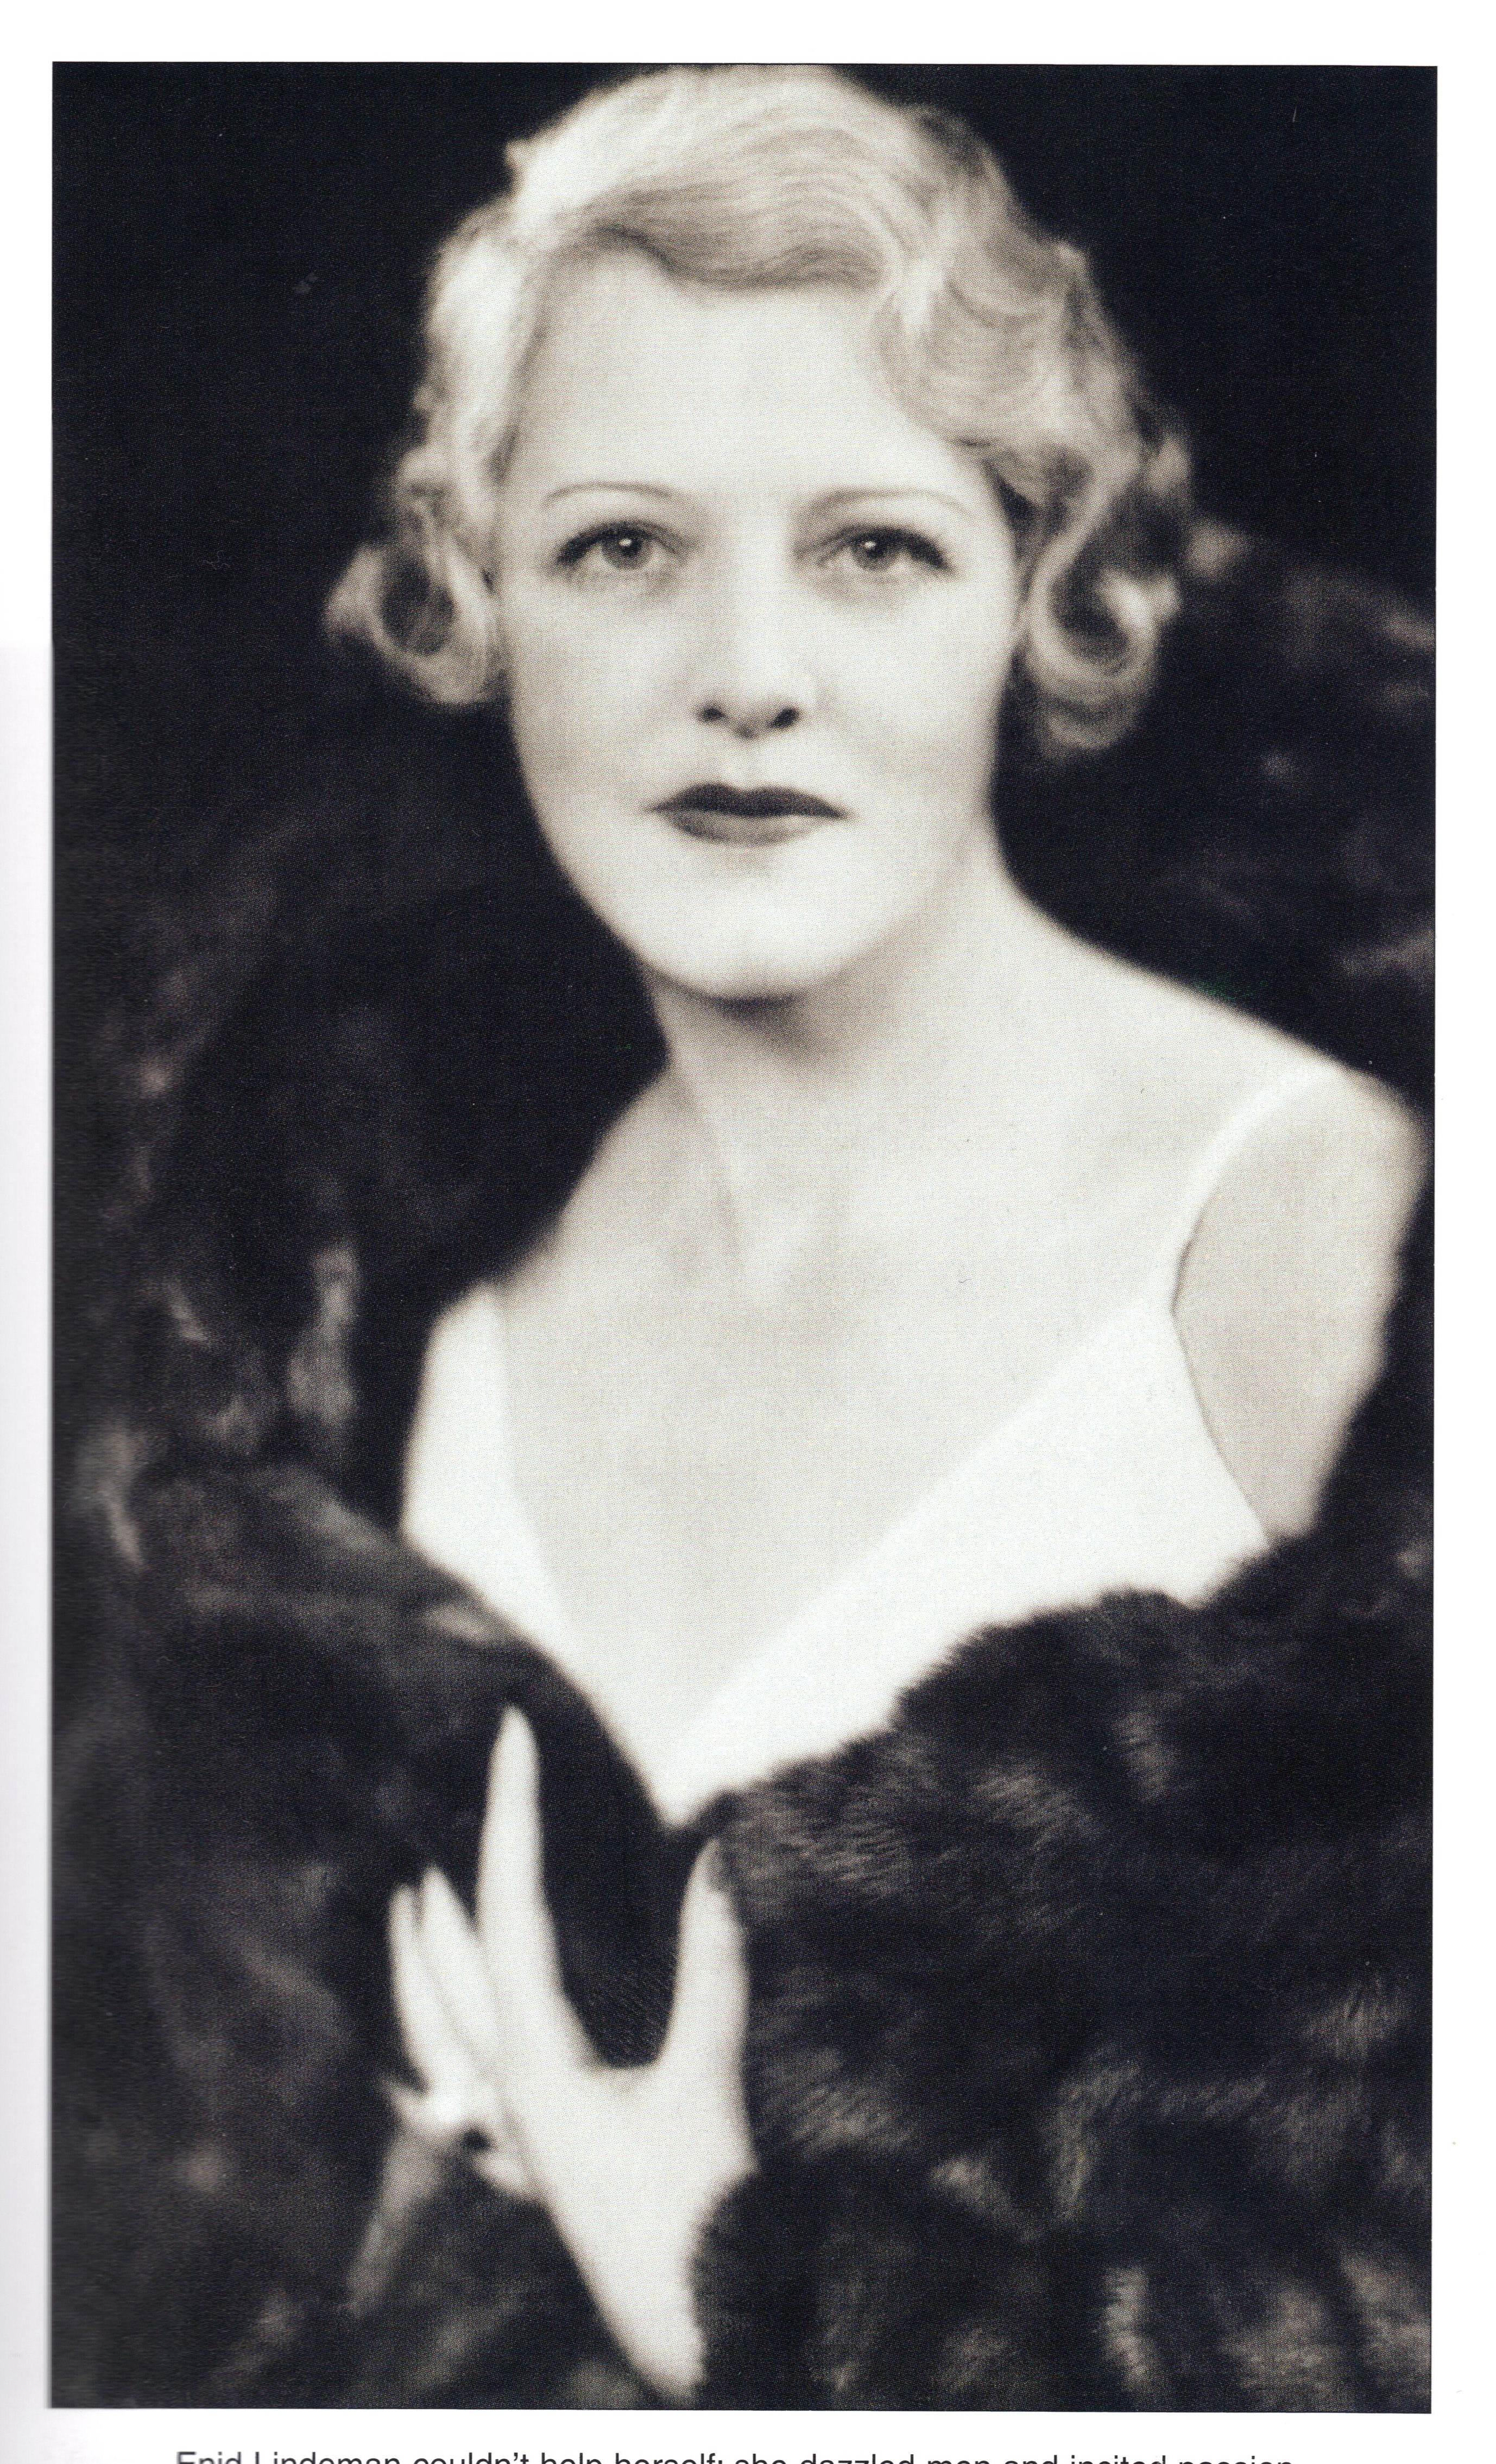 A glamorous shot of Enid, late 1920s